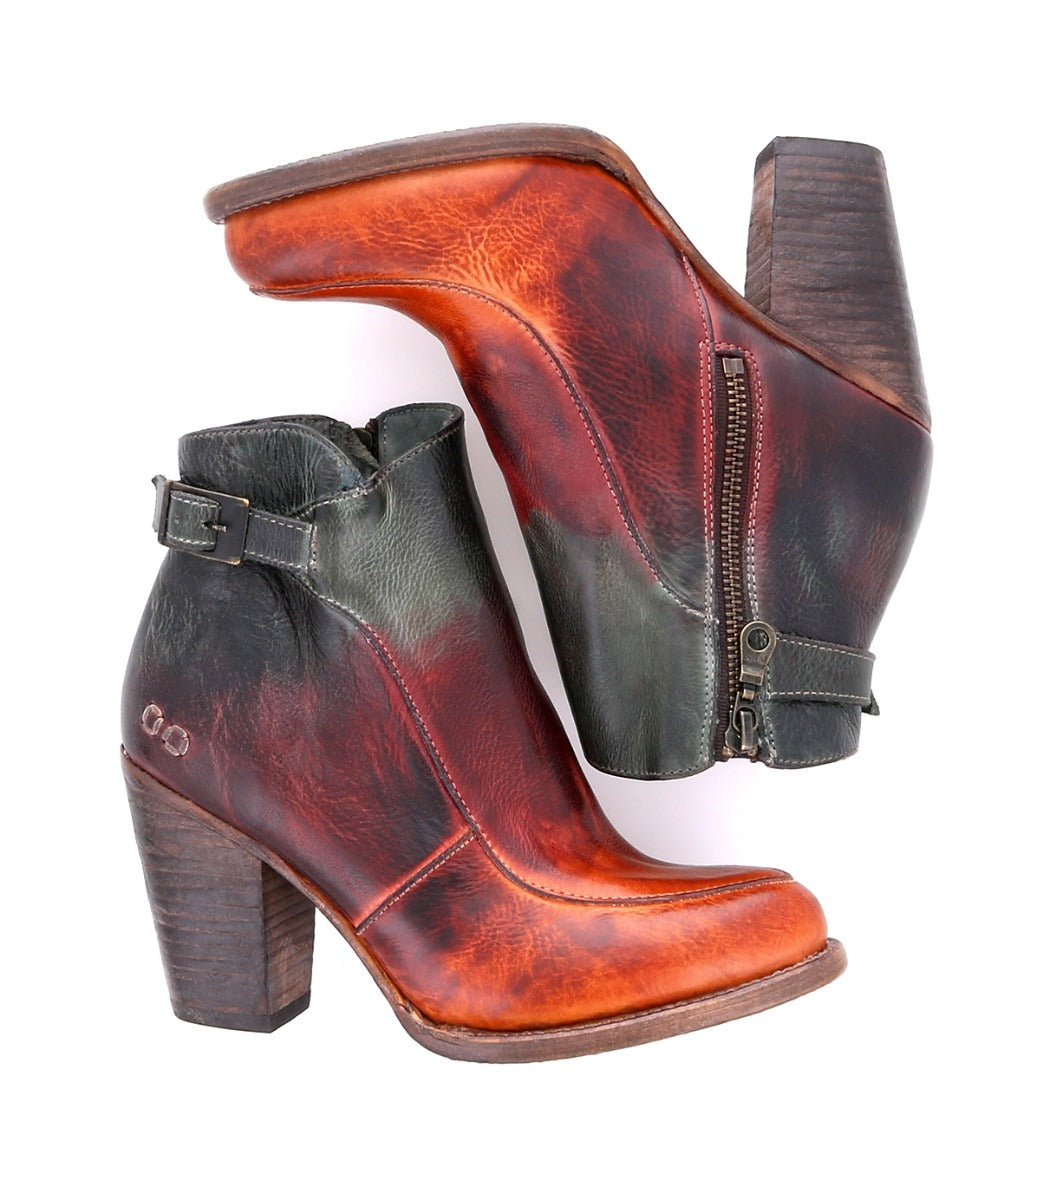 A pair of Isla women's ankle boots in red, green and orange by Bed Stu.